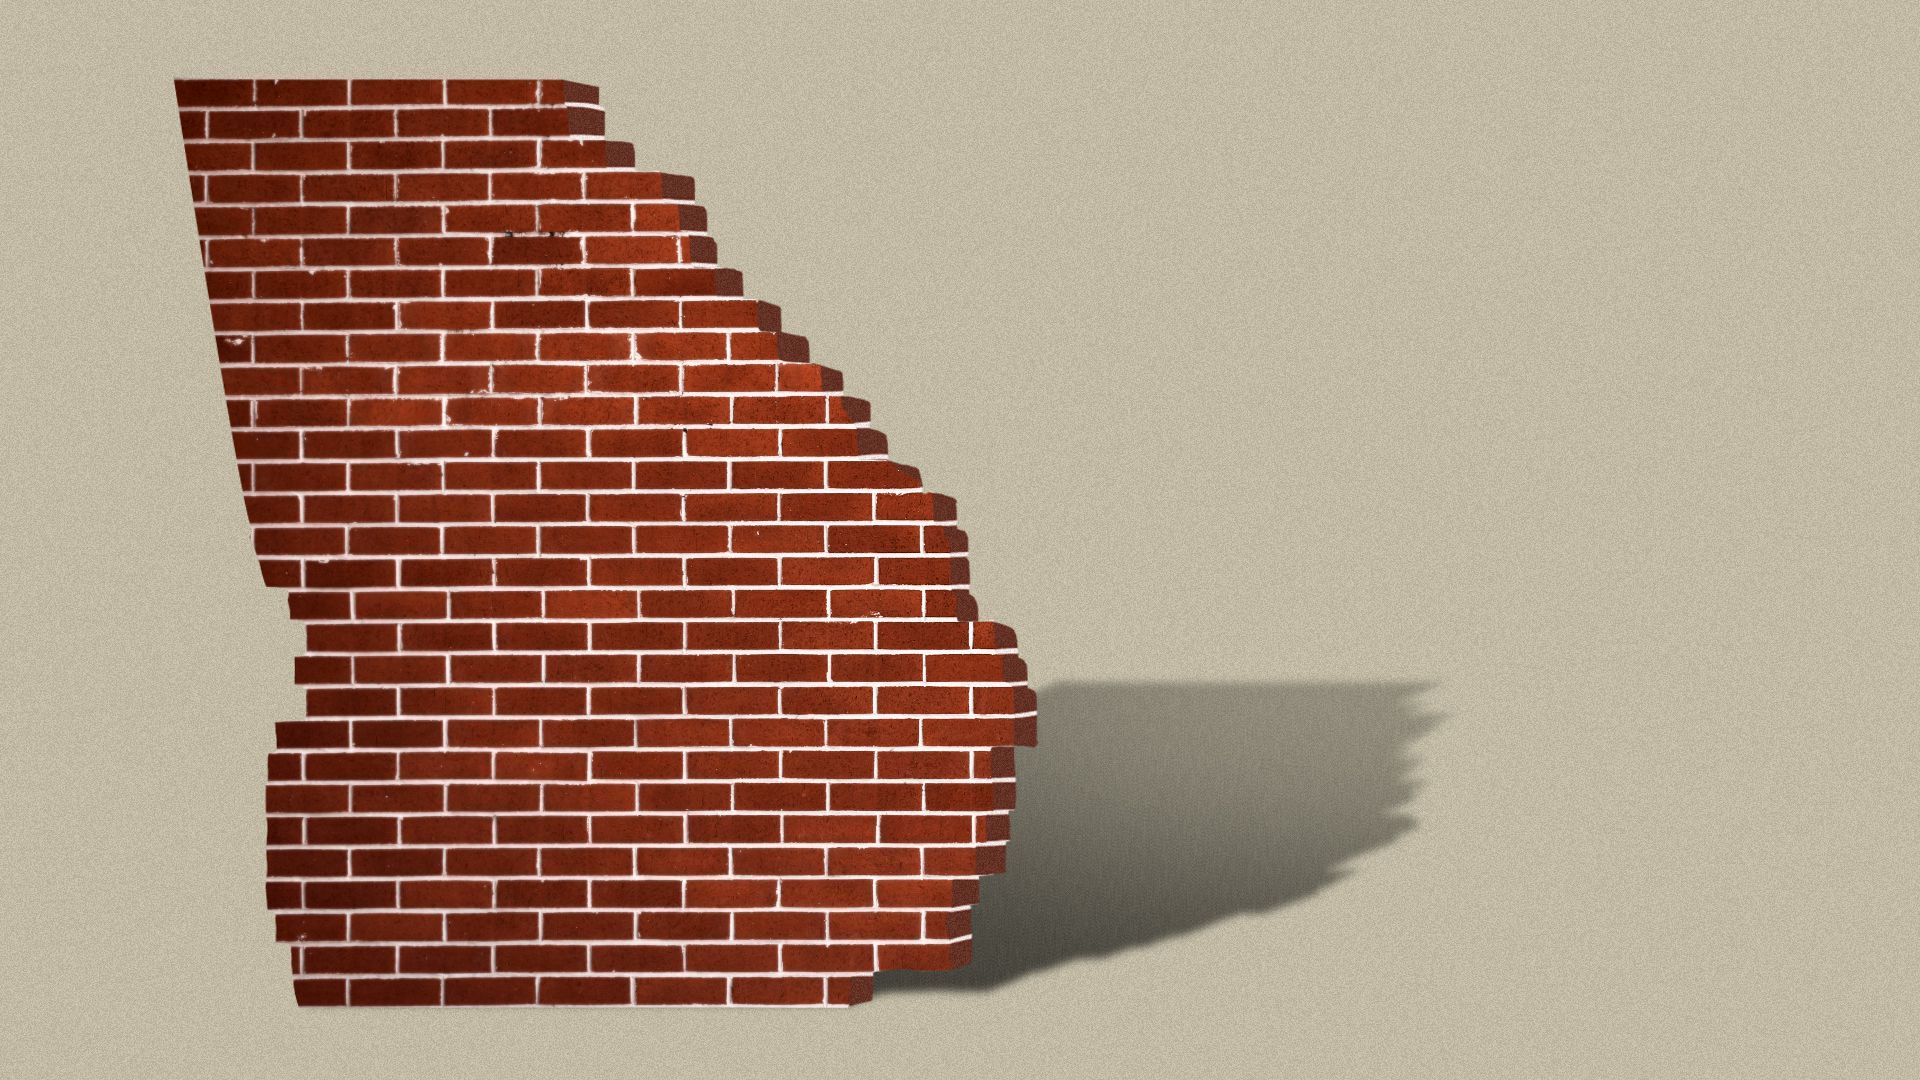 Illustration of a brick wall shaped like the state of Georgia.